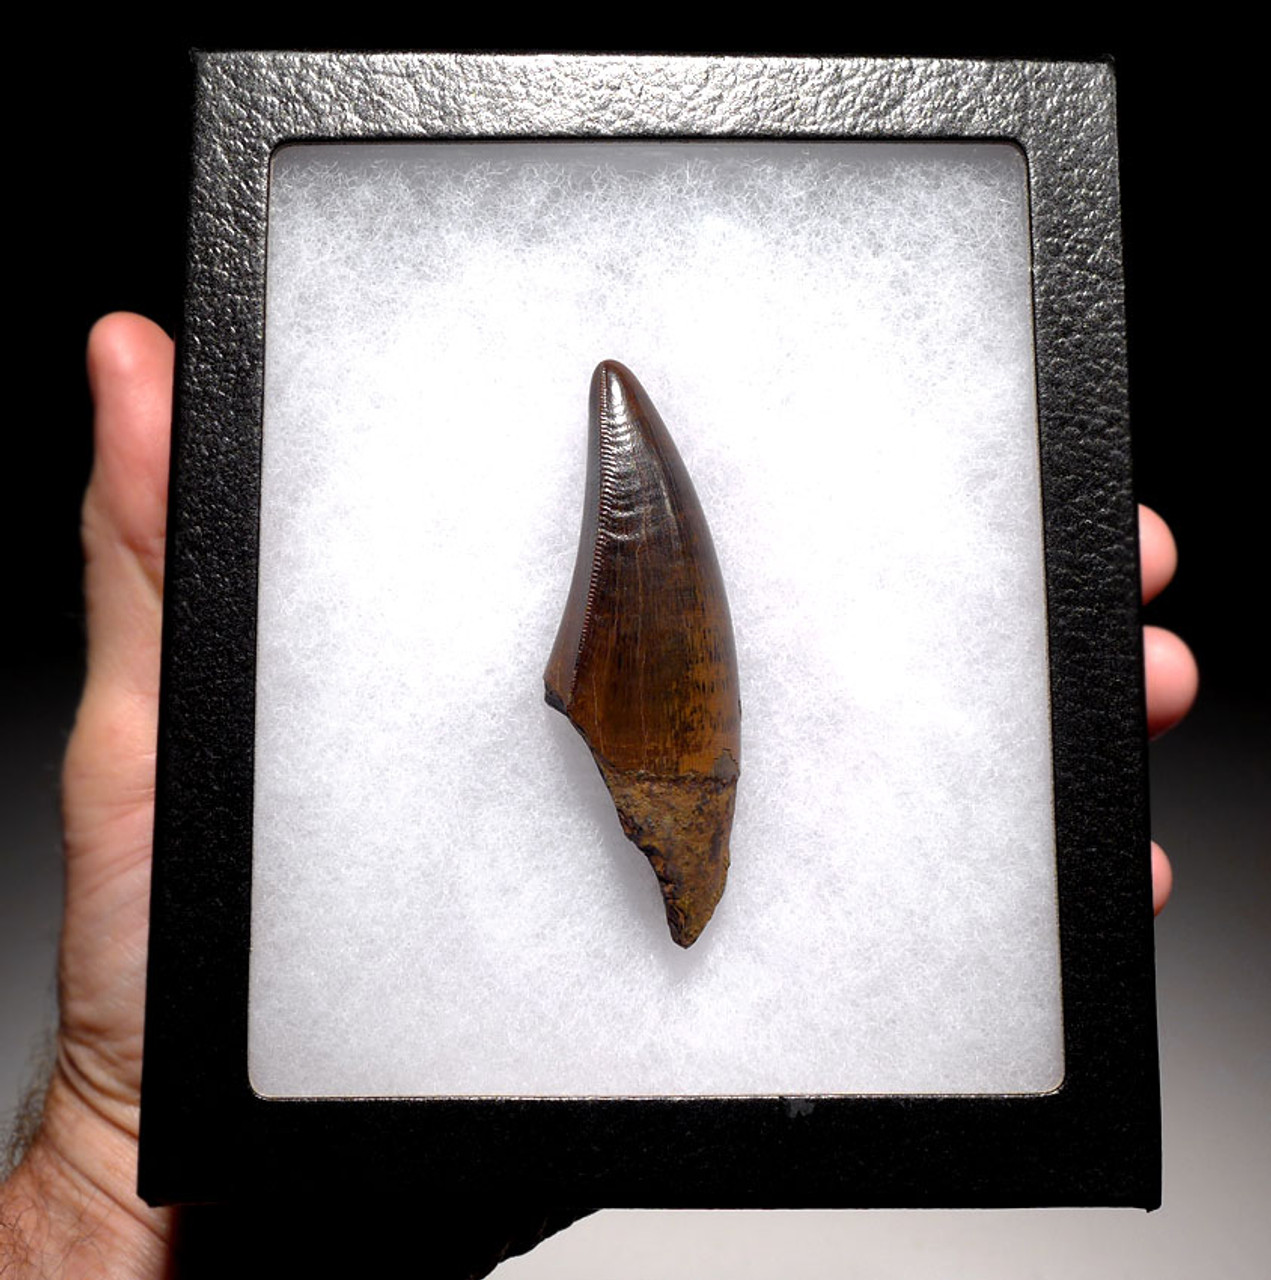 DT18-096 - ULTRA RARE 3.35 INCH LARGE INVESTMENT GRADE TYRANNOSAURUS REX TOOTH